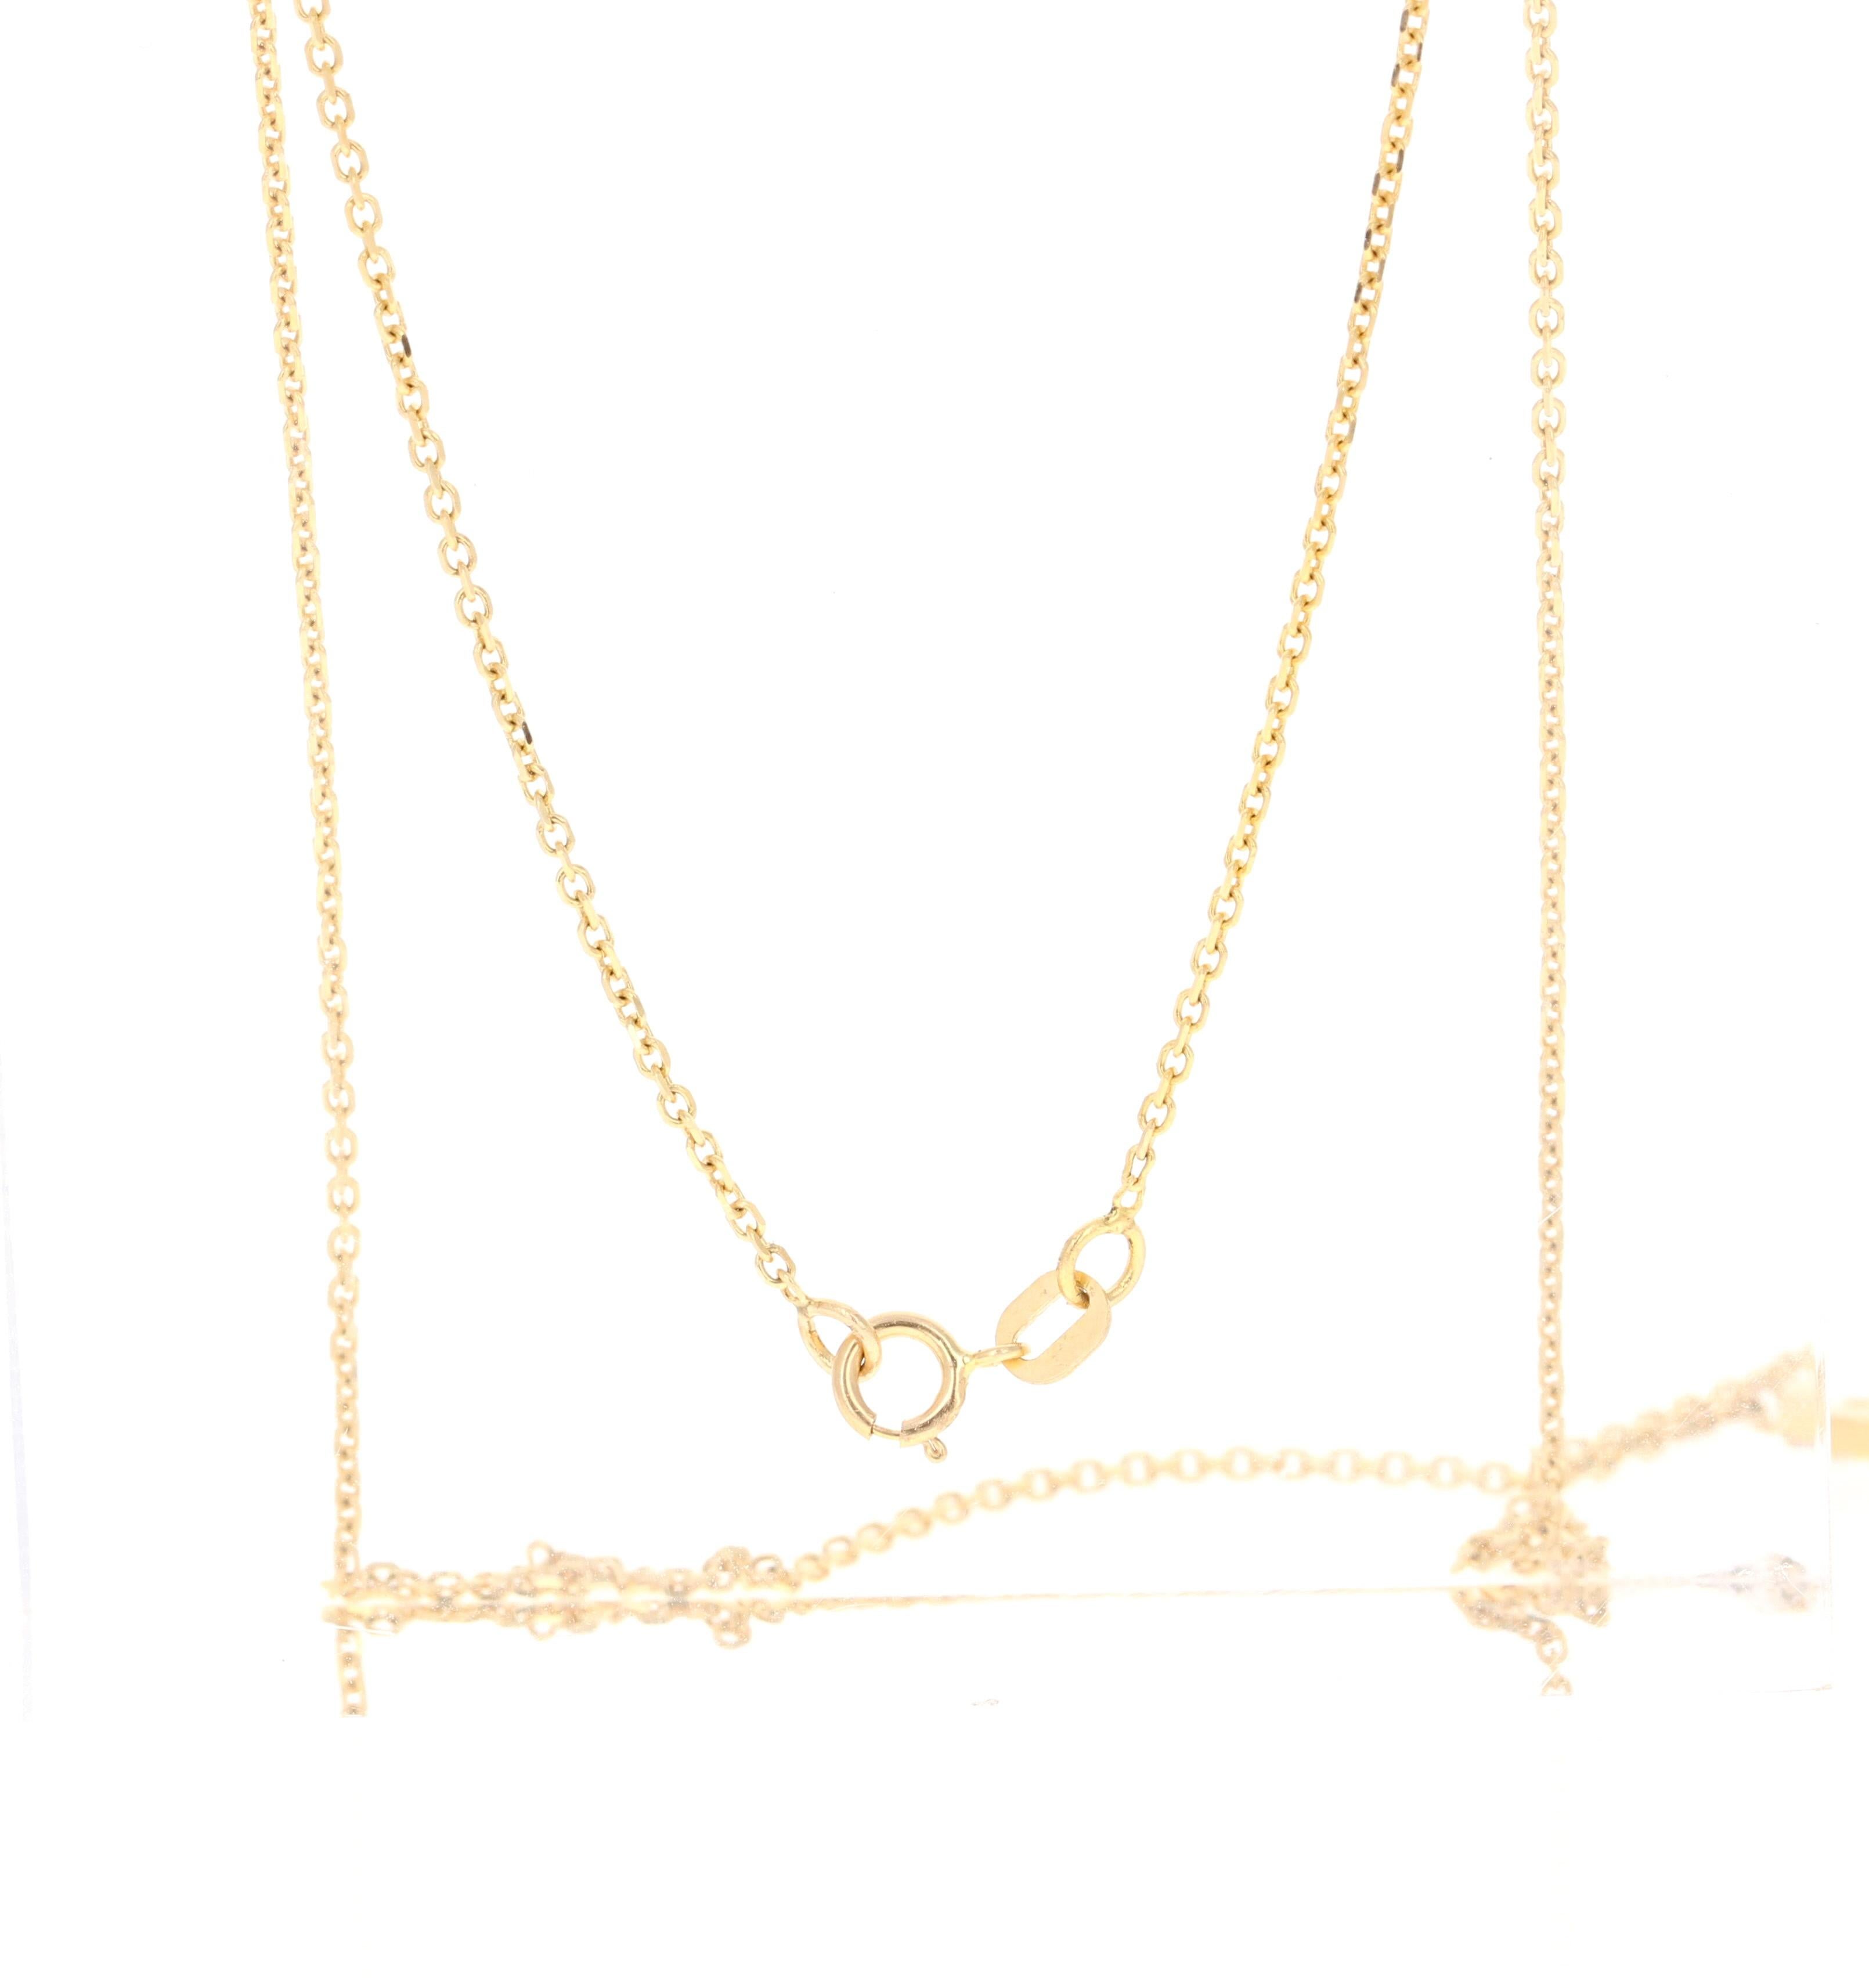 Contemporary 0.19 Carat Diamond Chain Necklace 14 Karat Yellow Gold For Sale